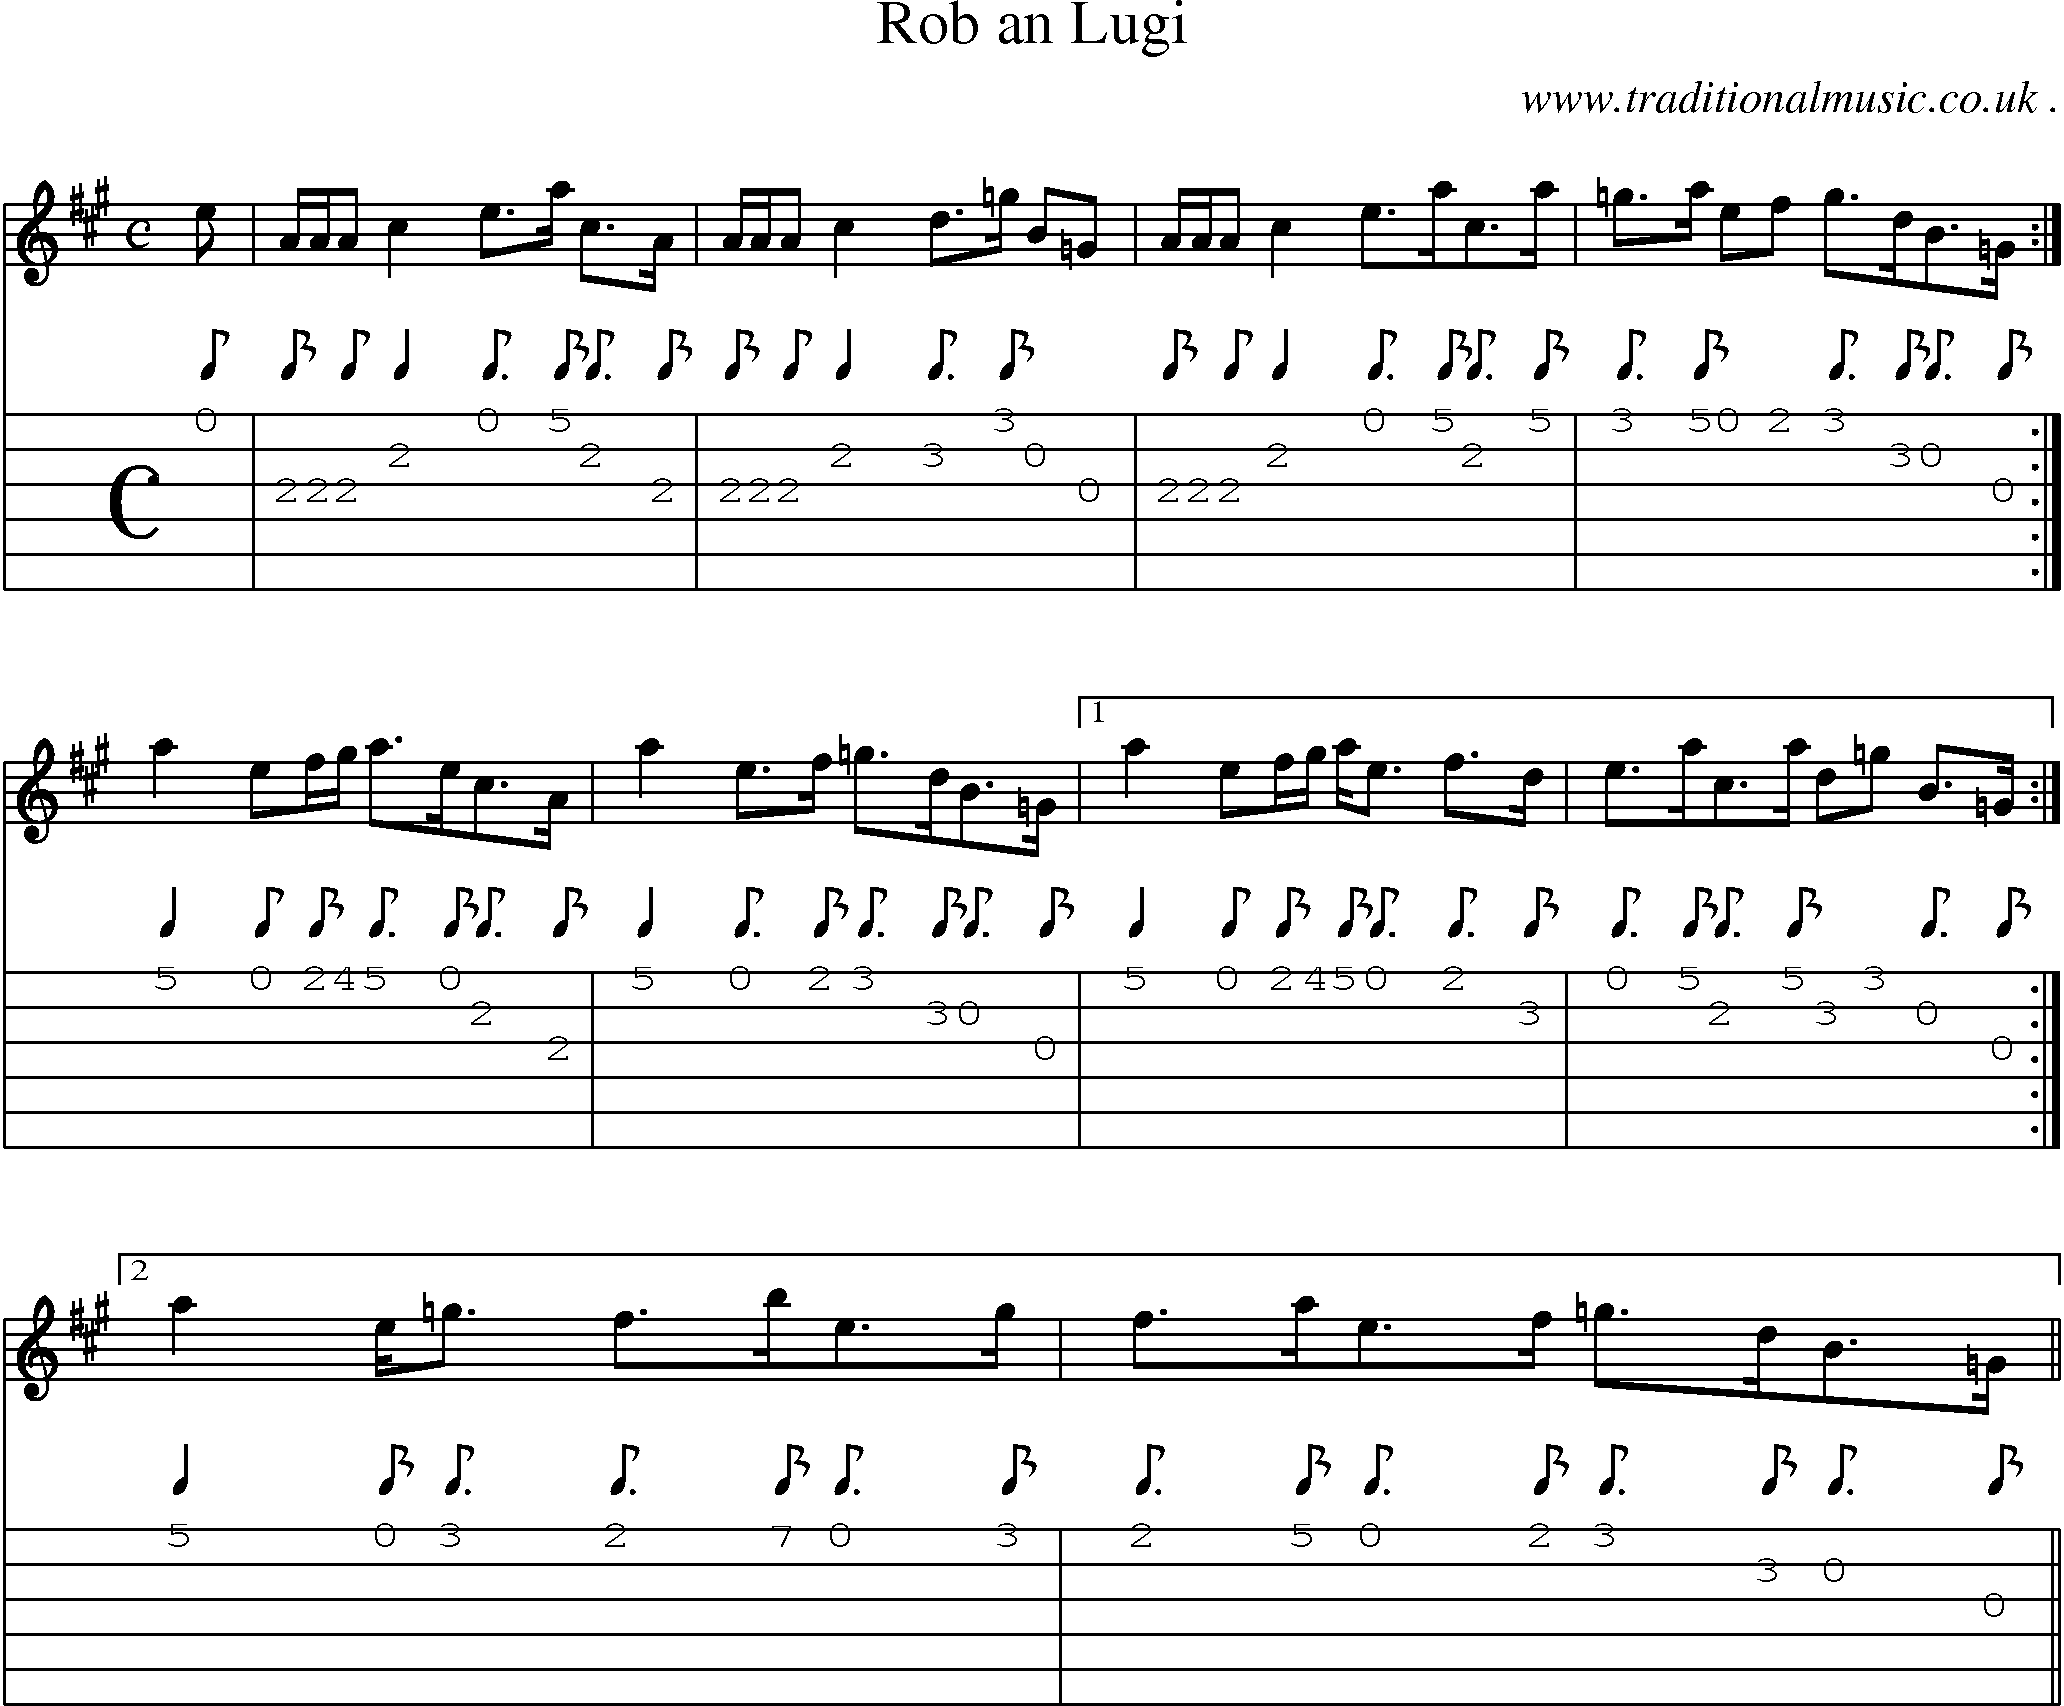 Sheet-music  score, Chords and Guitar Tabs for Rob An Lugi